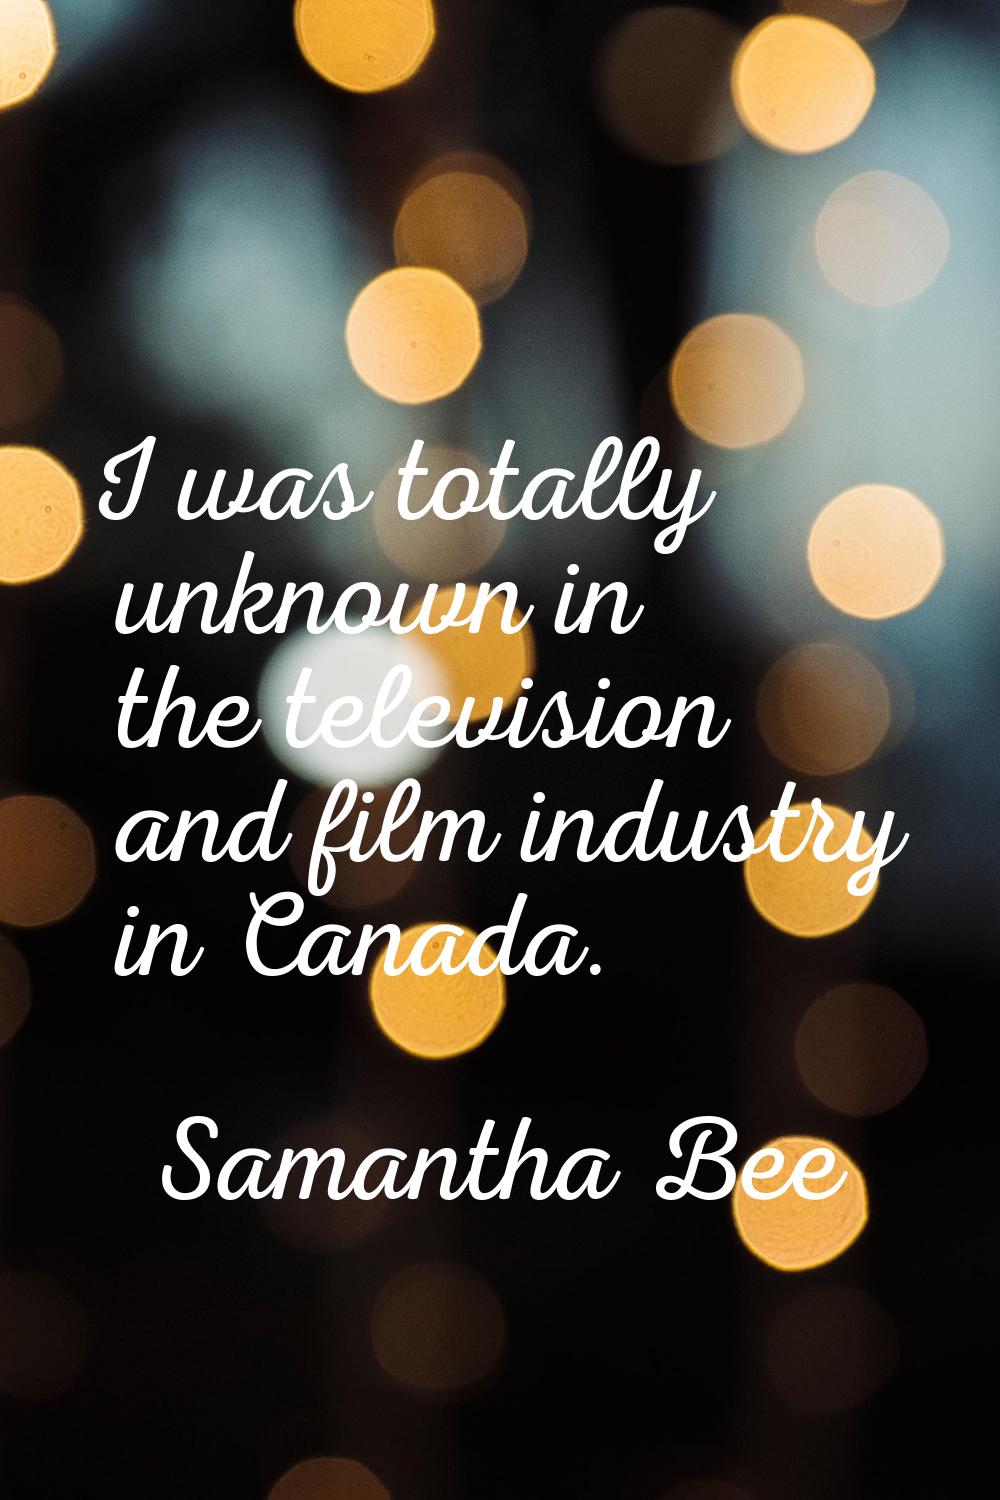 I was totally unknown in the television and film industry in Canada.